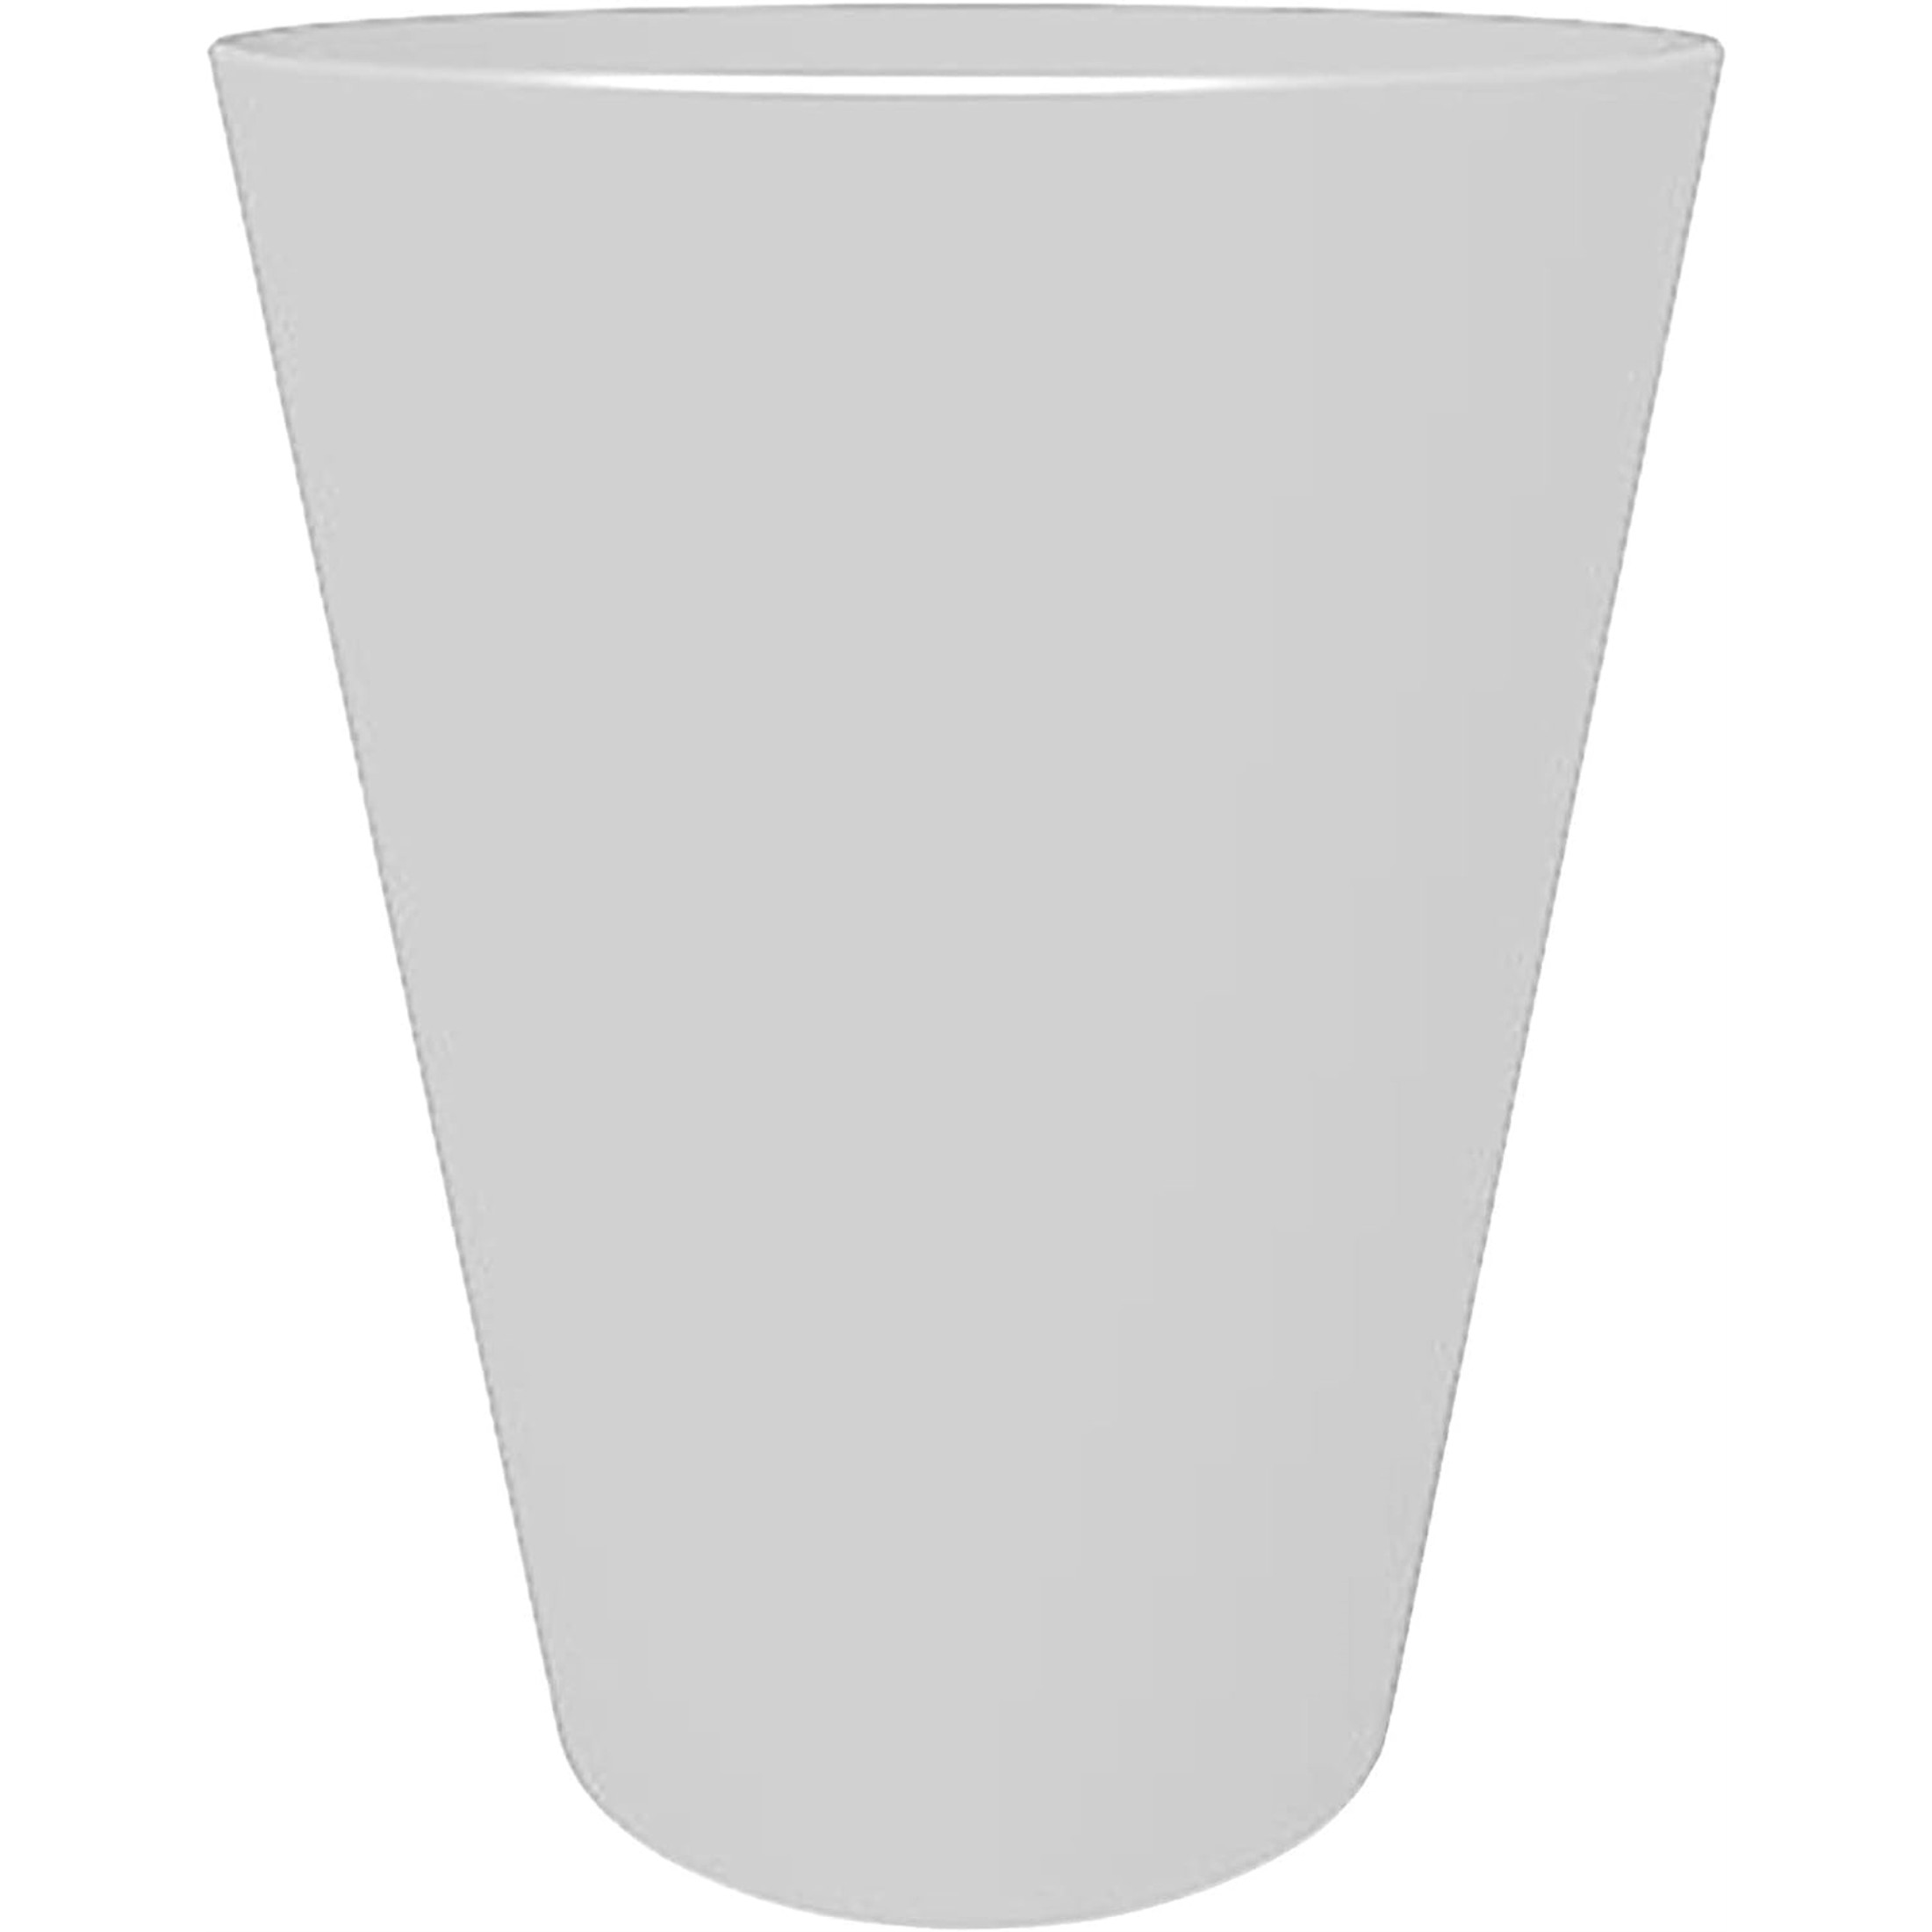 Bloem Indoor/Outdoor Tall Finley Tapered Round, 100% Recycled Plastic Pot, Casper White, 4 Gallon Soil Capacity, 14